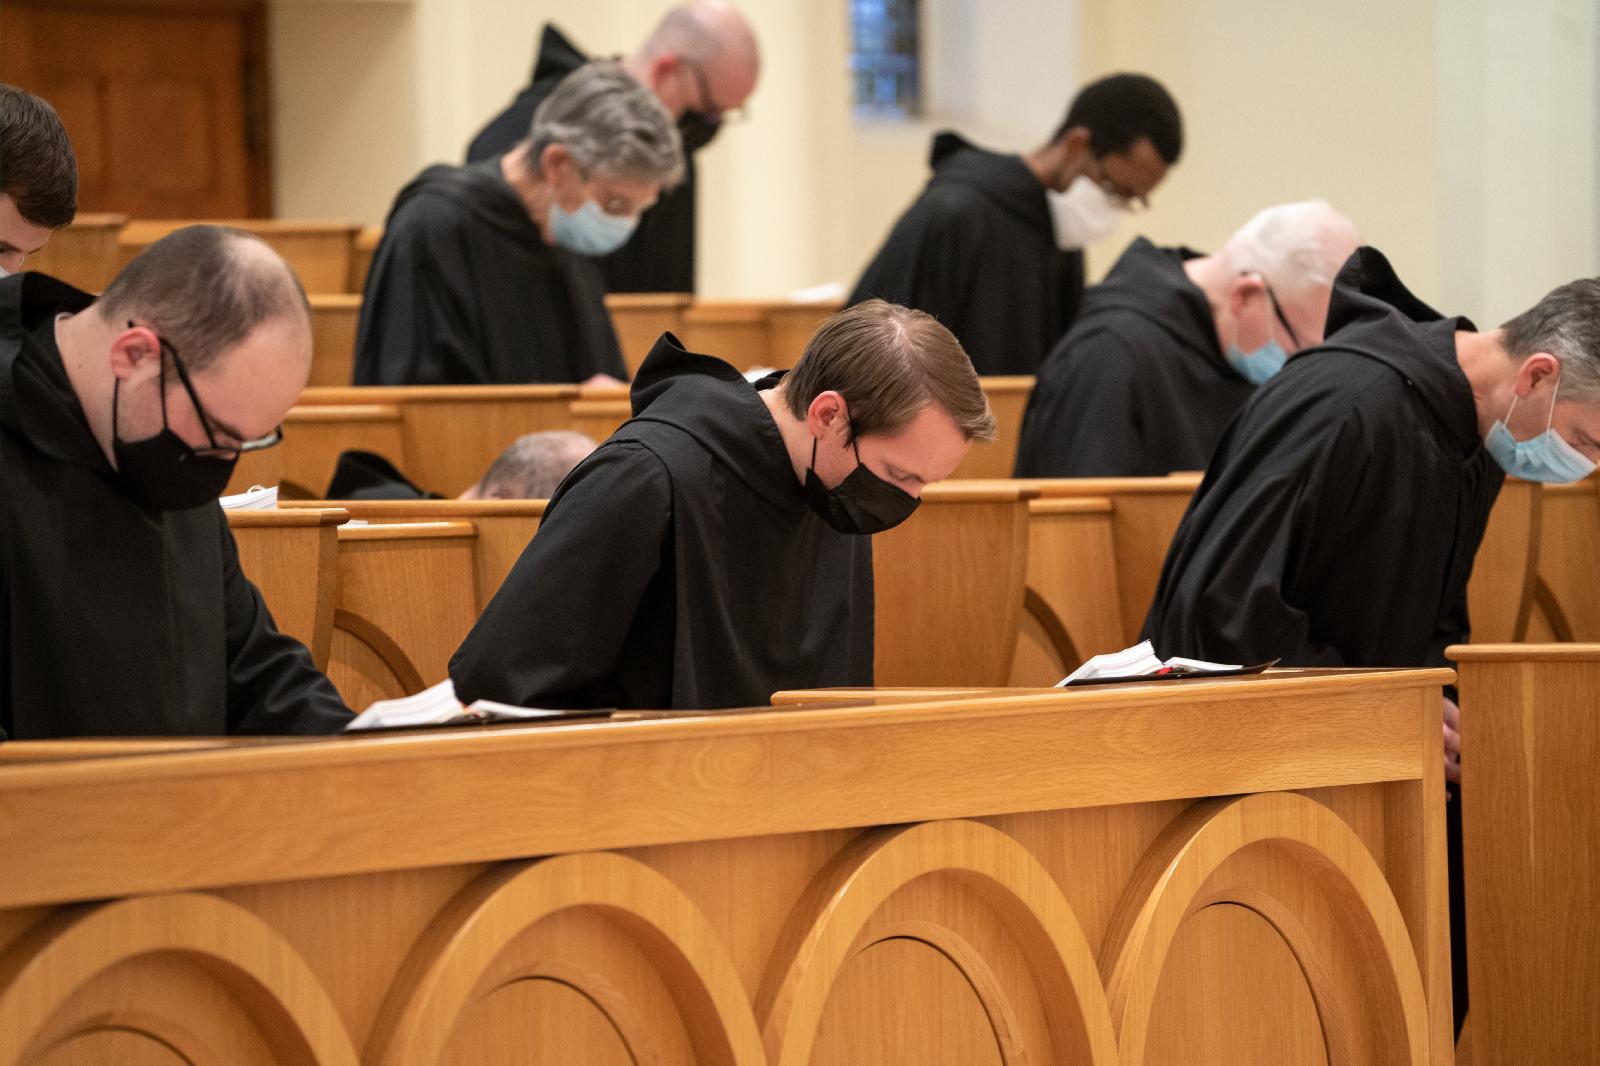 Congregation of Bishops announces symposium on vocations